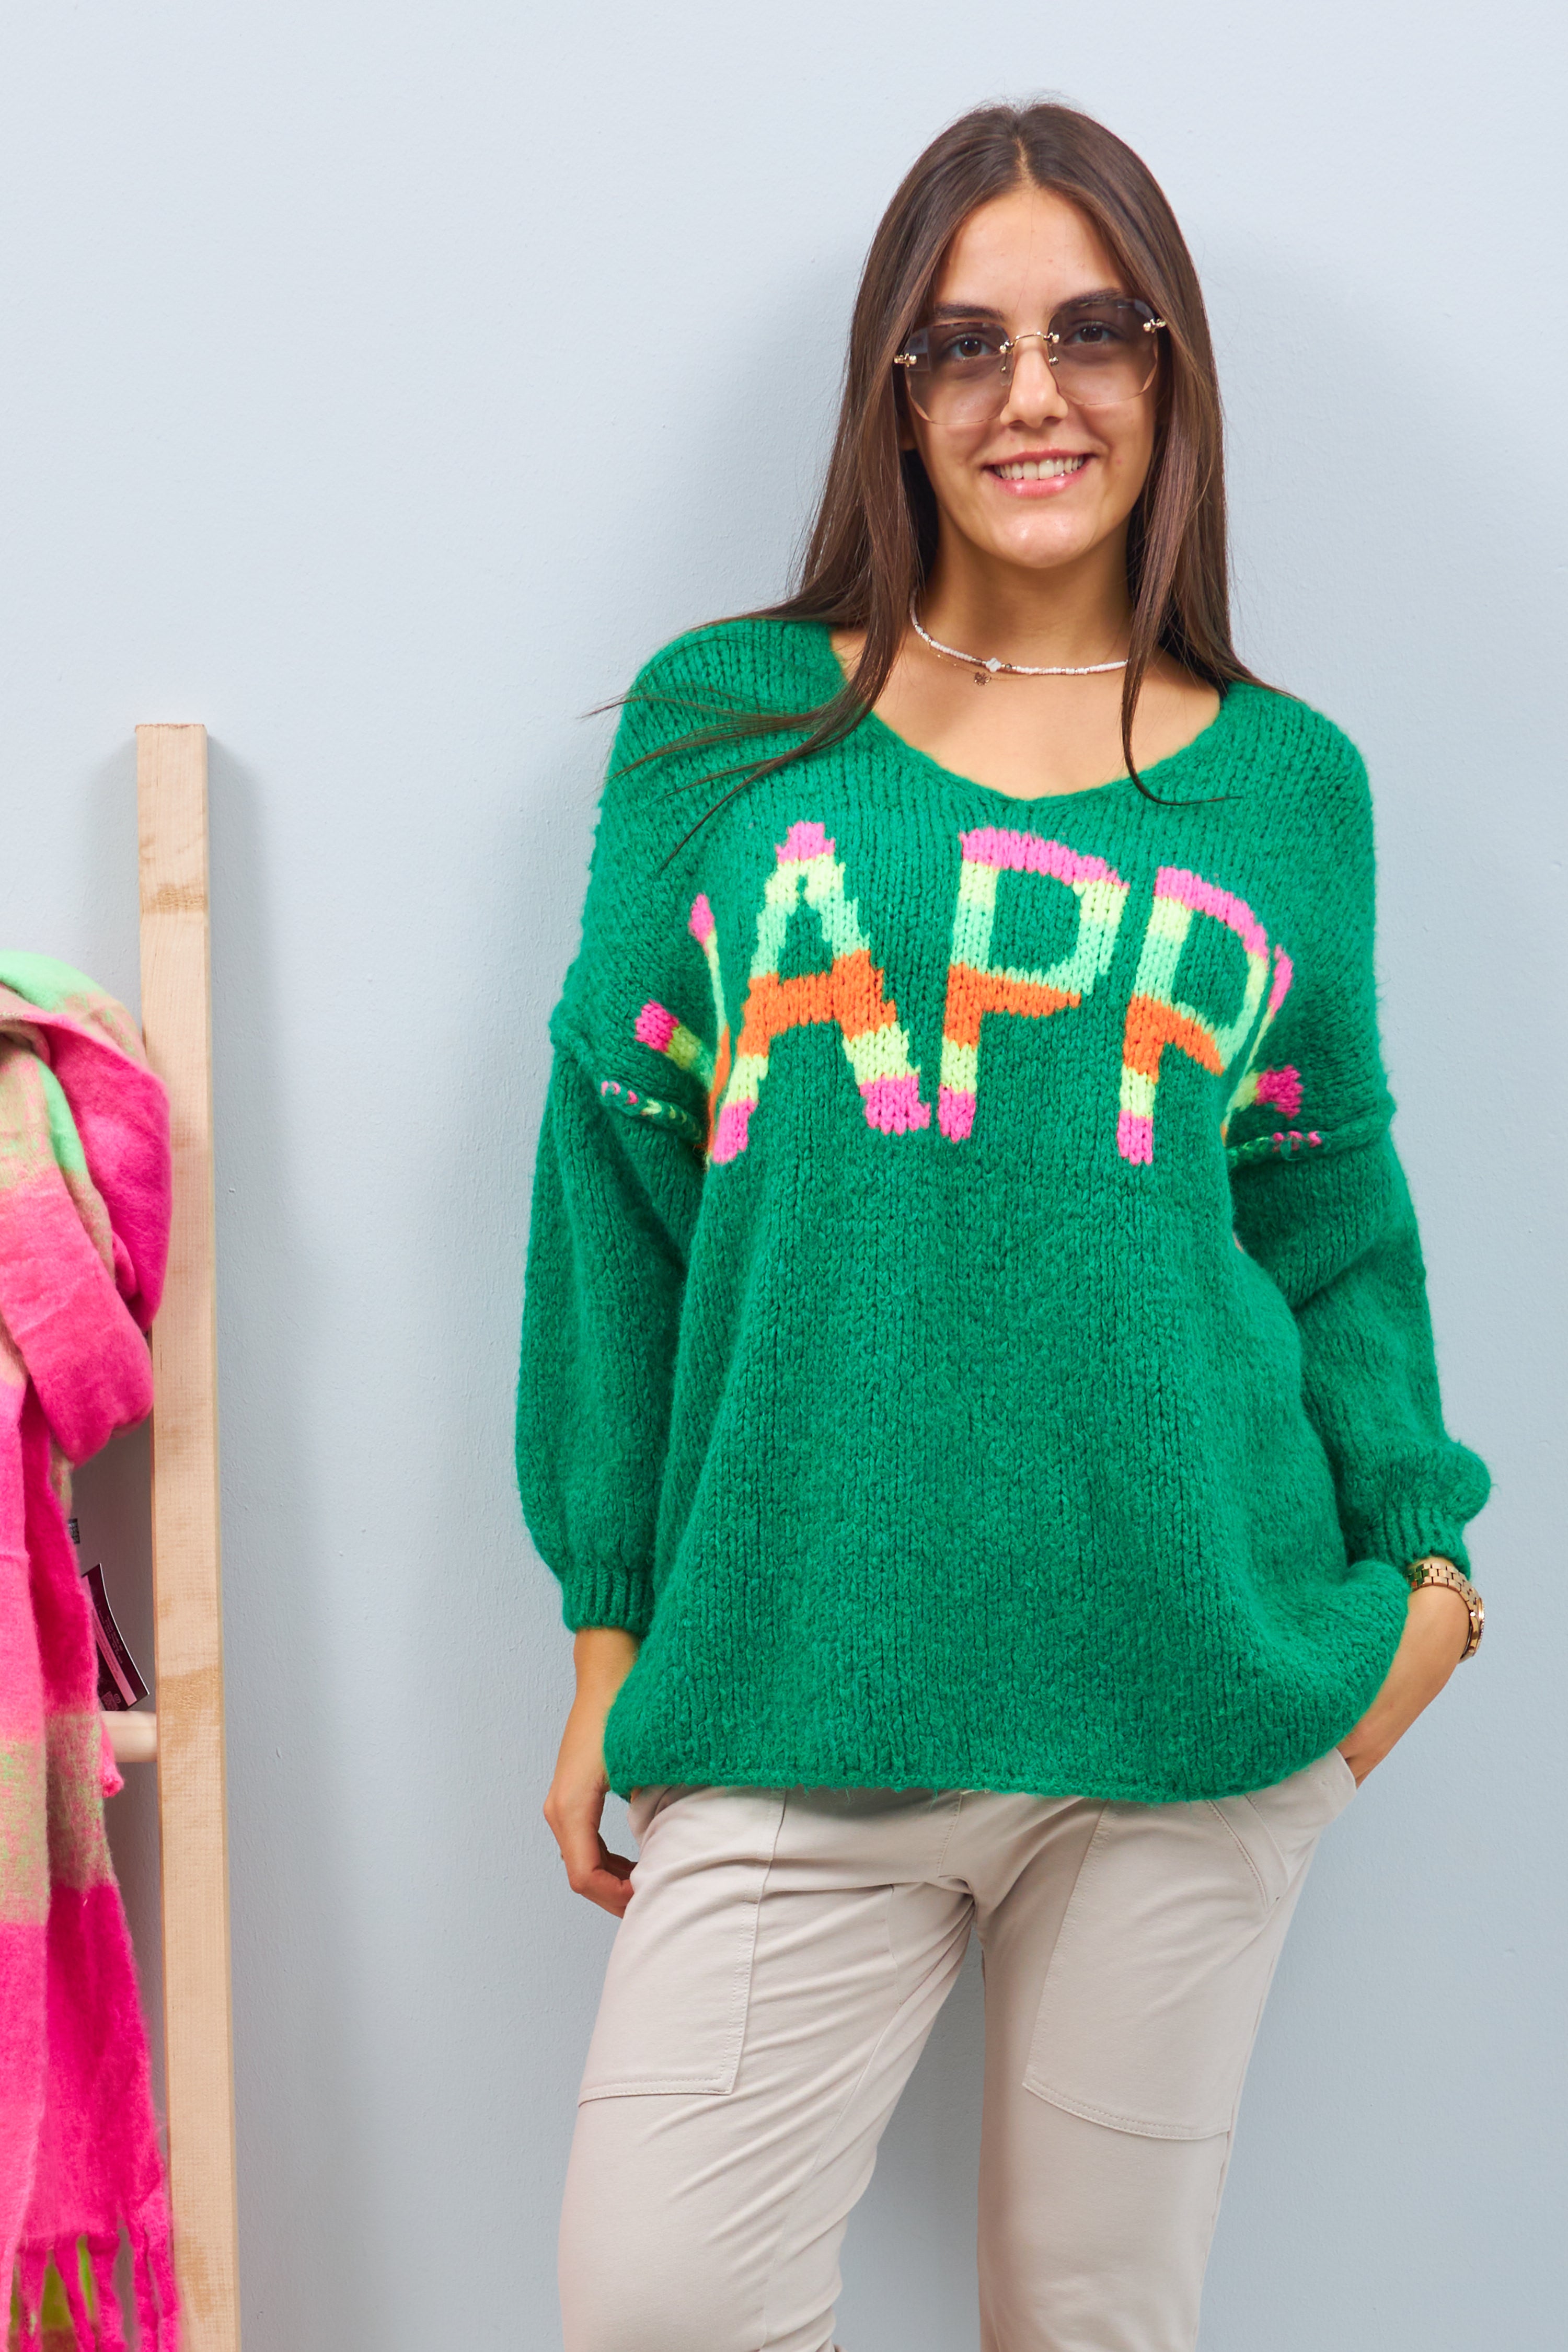 Knitted sweater with "HAPPY" lettering, green and colorful